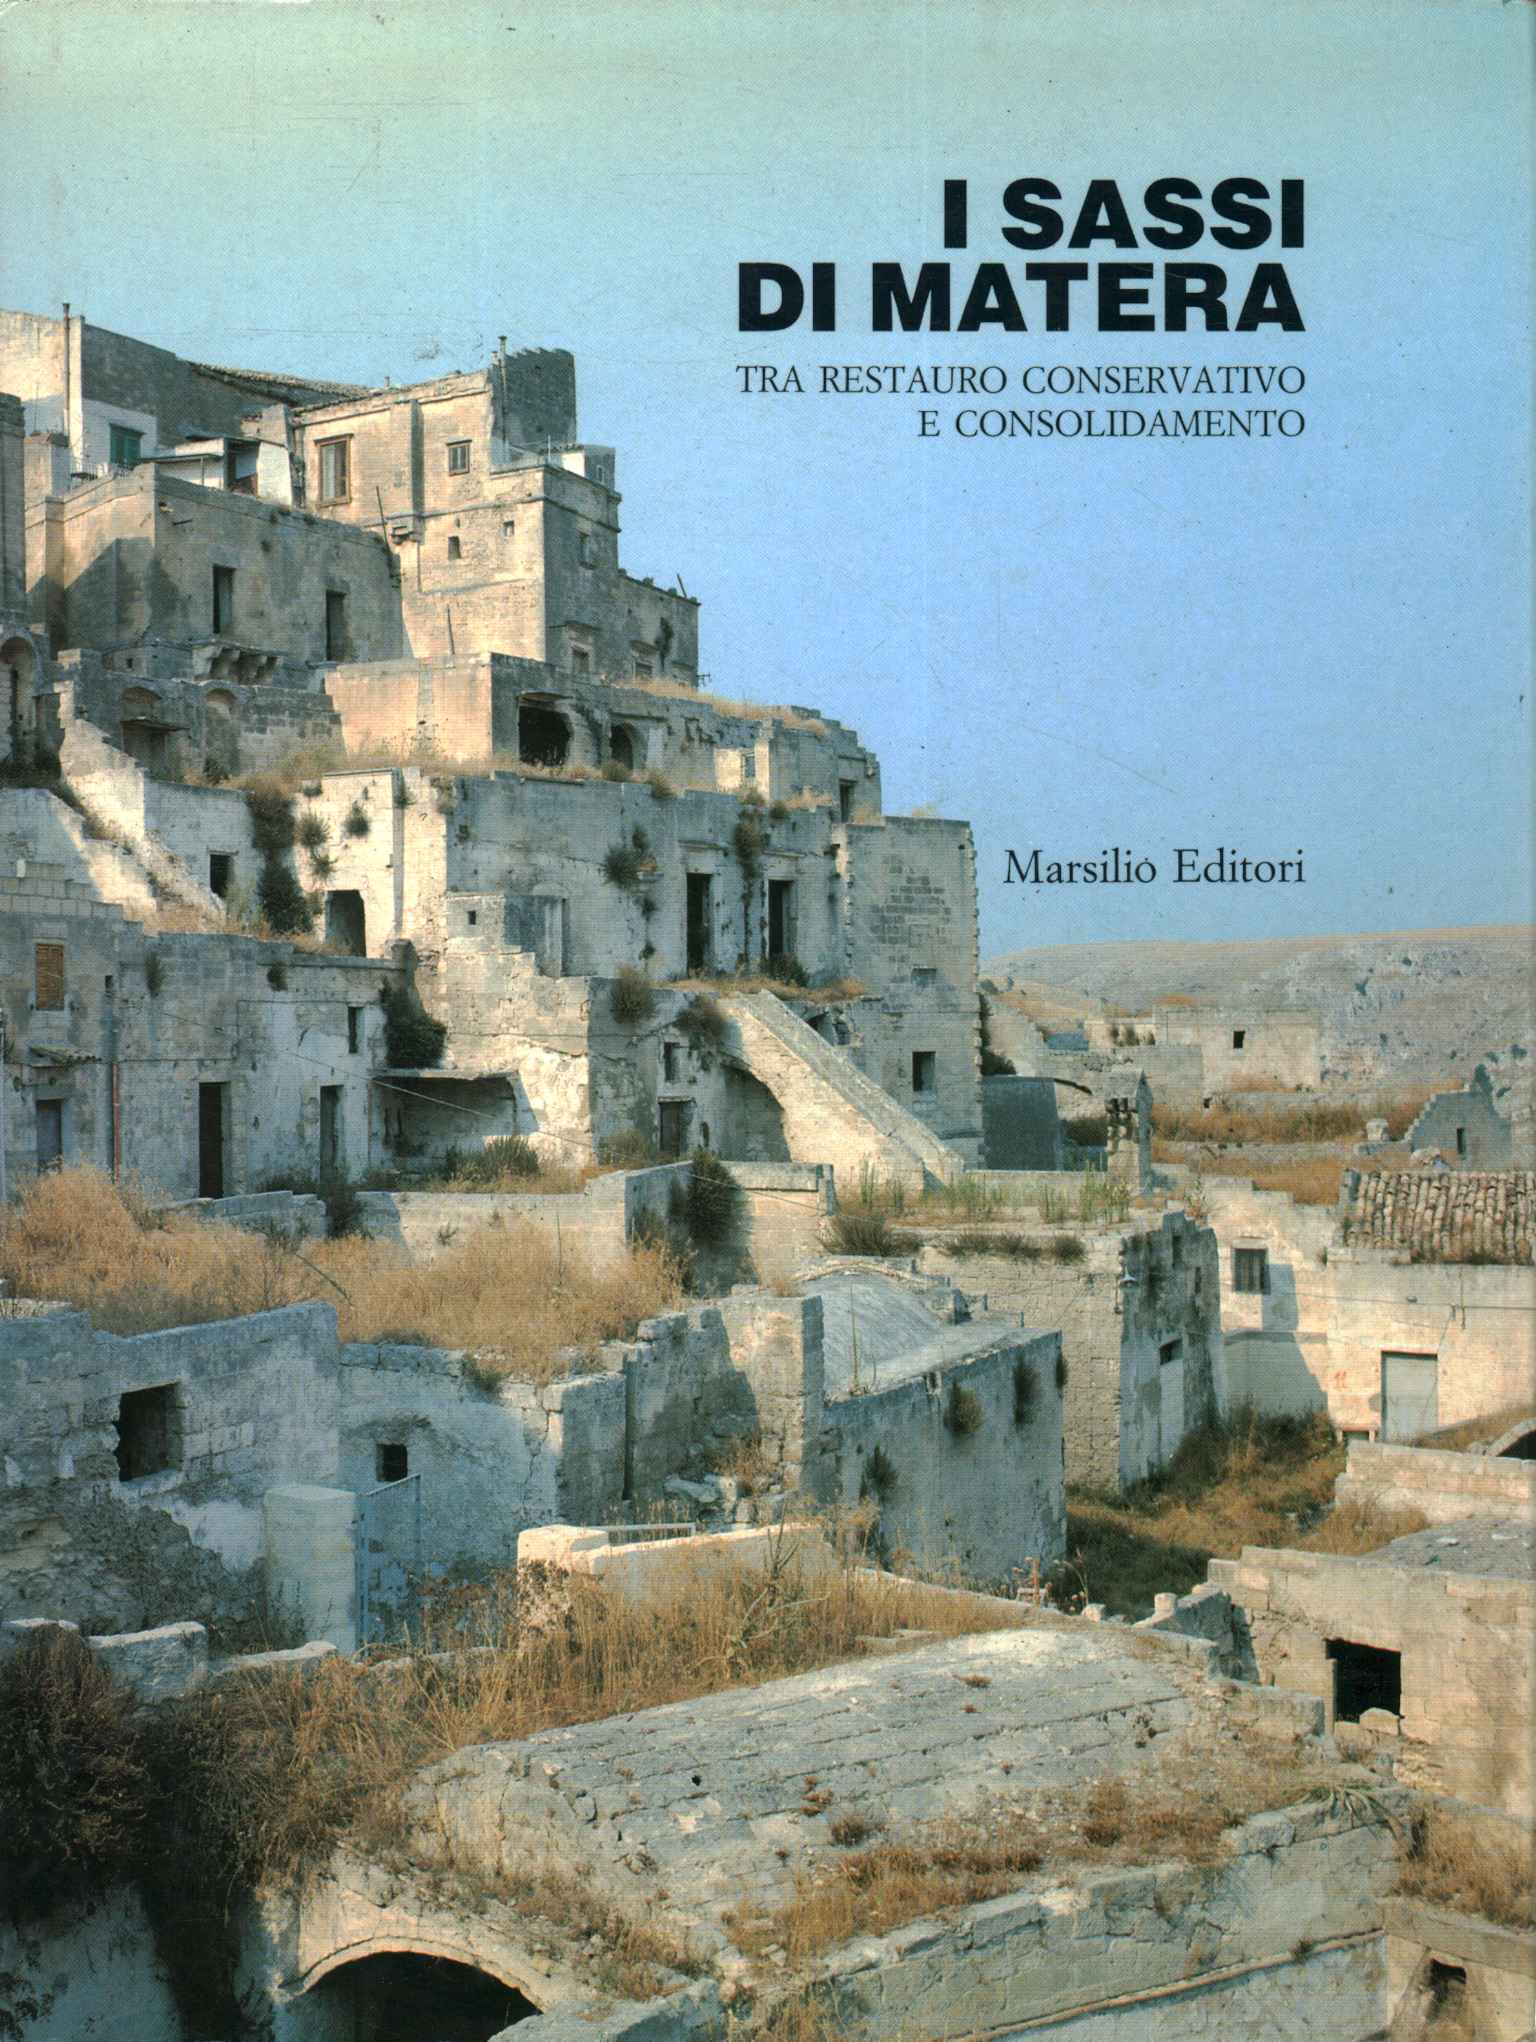 The stones of Matera